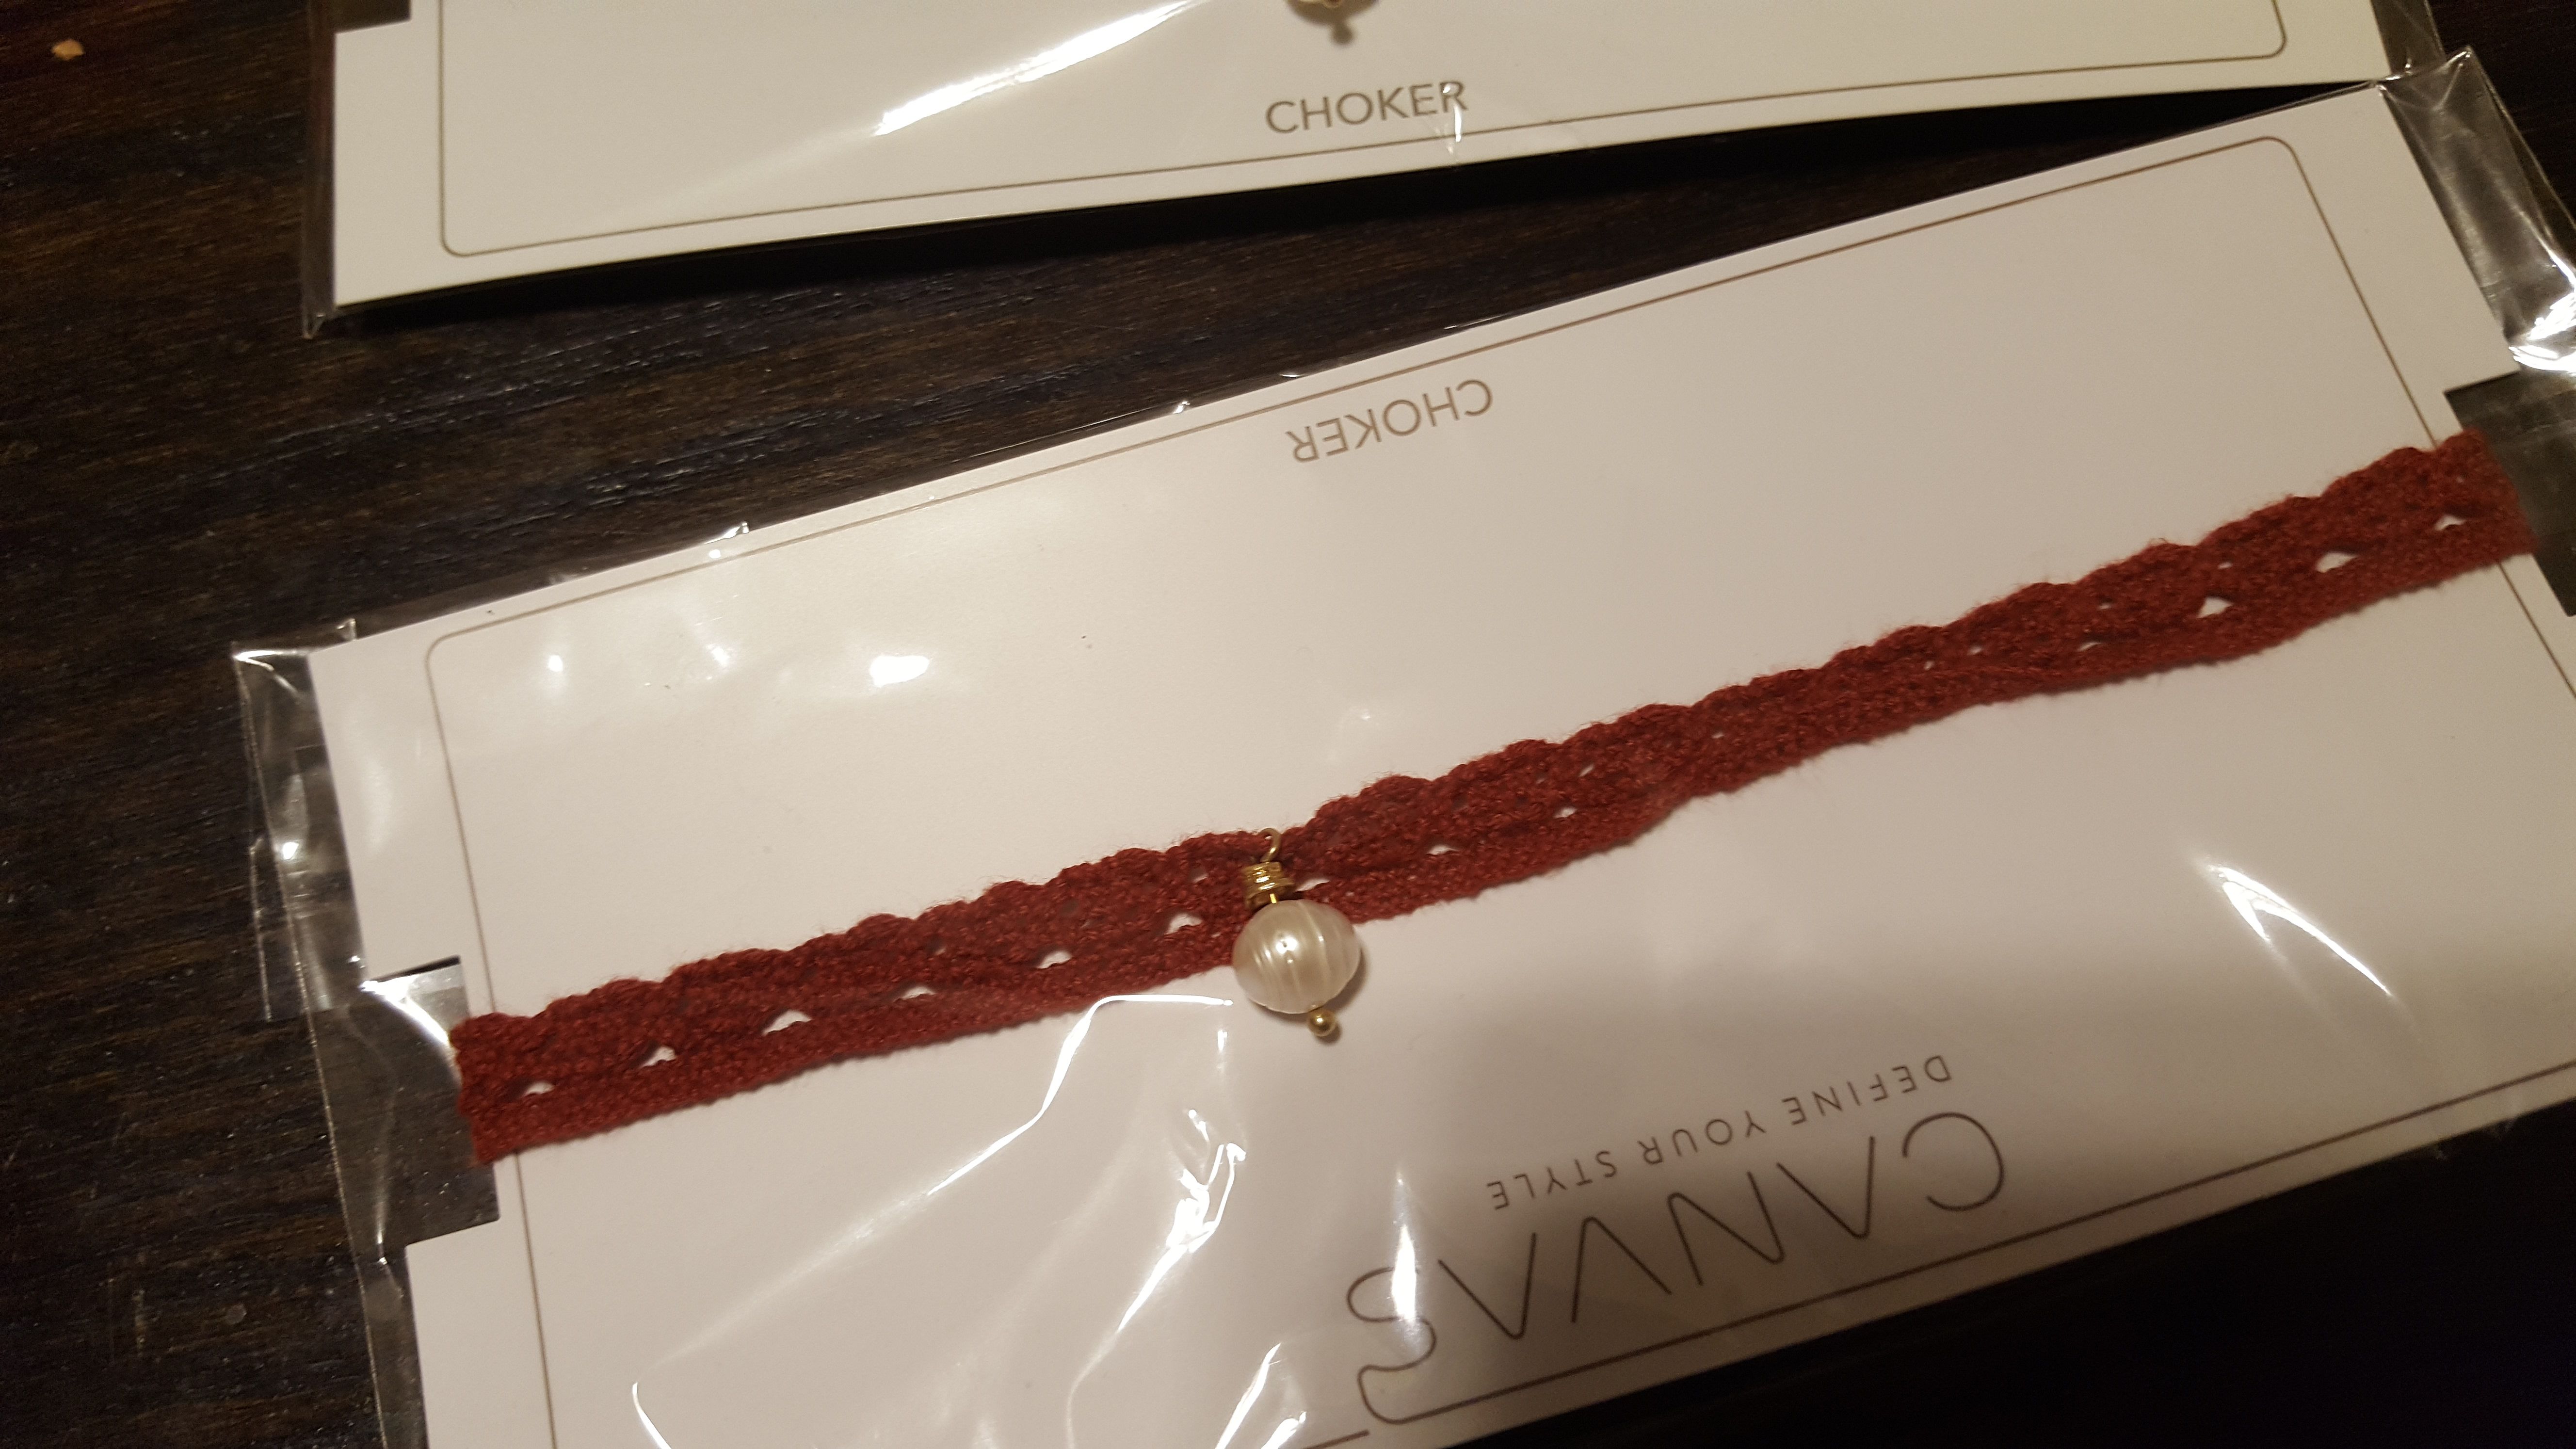 Brand new red chocker with pearl